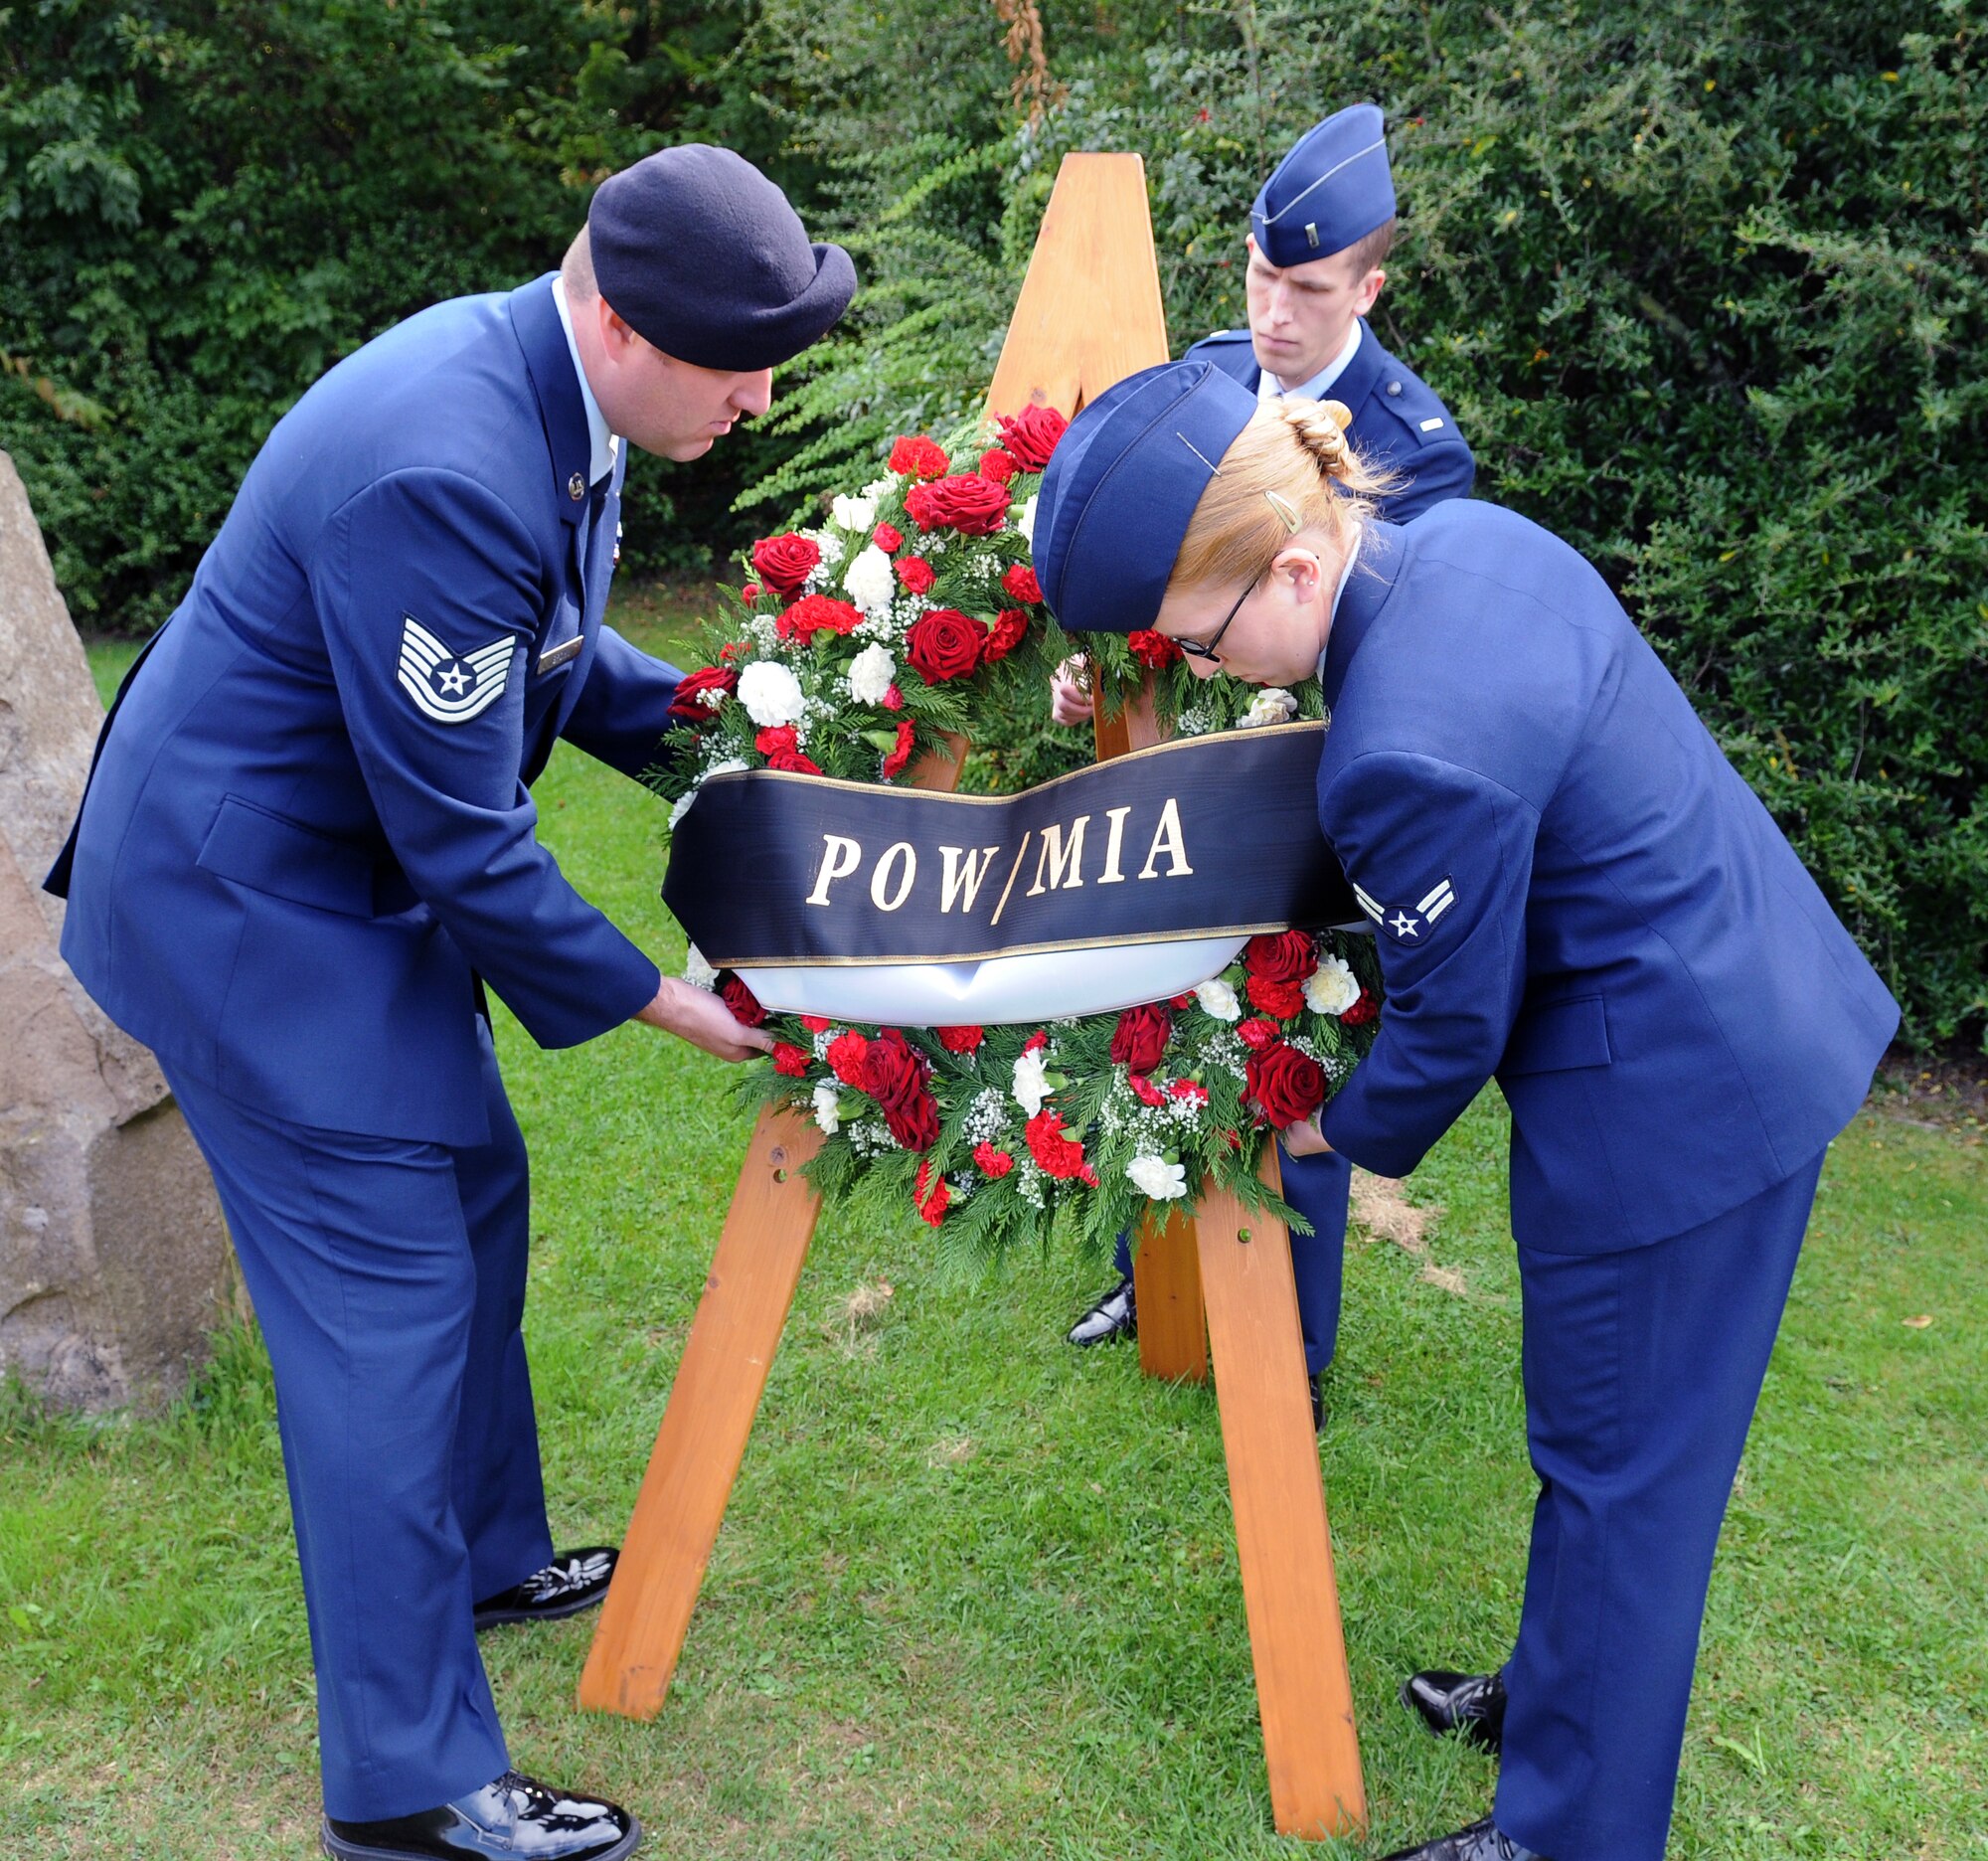 SPANGDAHLEM AIR BASE, Germany -- Tech. Sgt. Eric Brown, 52nd Security Forces Squadron, Airman 1st Class Christina Peabody, 52nd Medical Operations Squadron, and 1st Lt. Andrew Williams, 52nd Operations Support Squadron, lay a wreath during the POW/MIA ceremony at the Air Park Sept. 18. The wreath was laid to honor and remember servicemembers listed as prisoners of war or missing in action. (U.S. Air Force photo/Airman 1st Class Nathanael Callon)